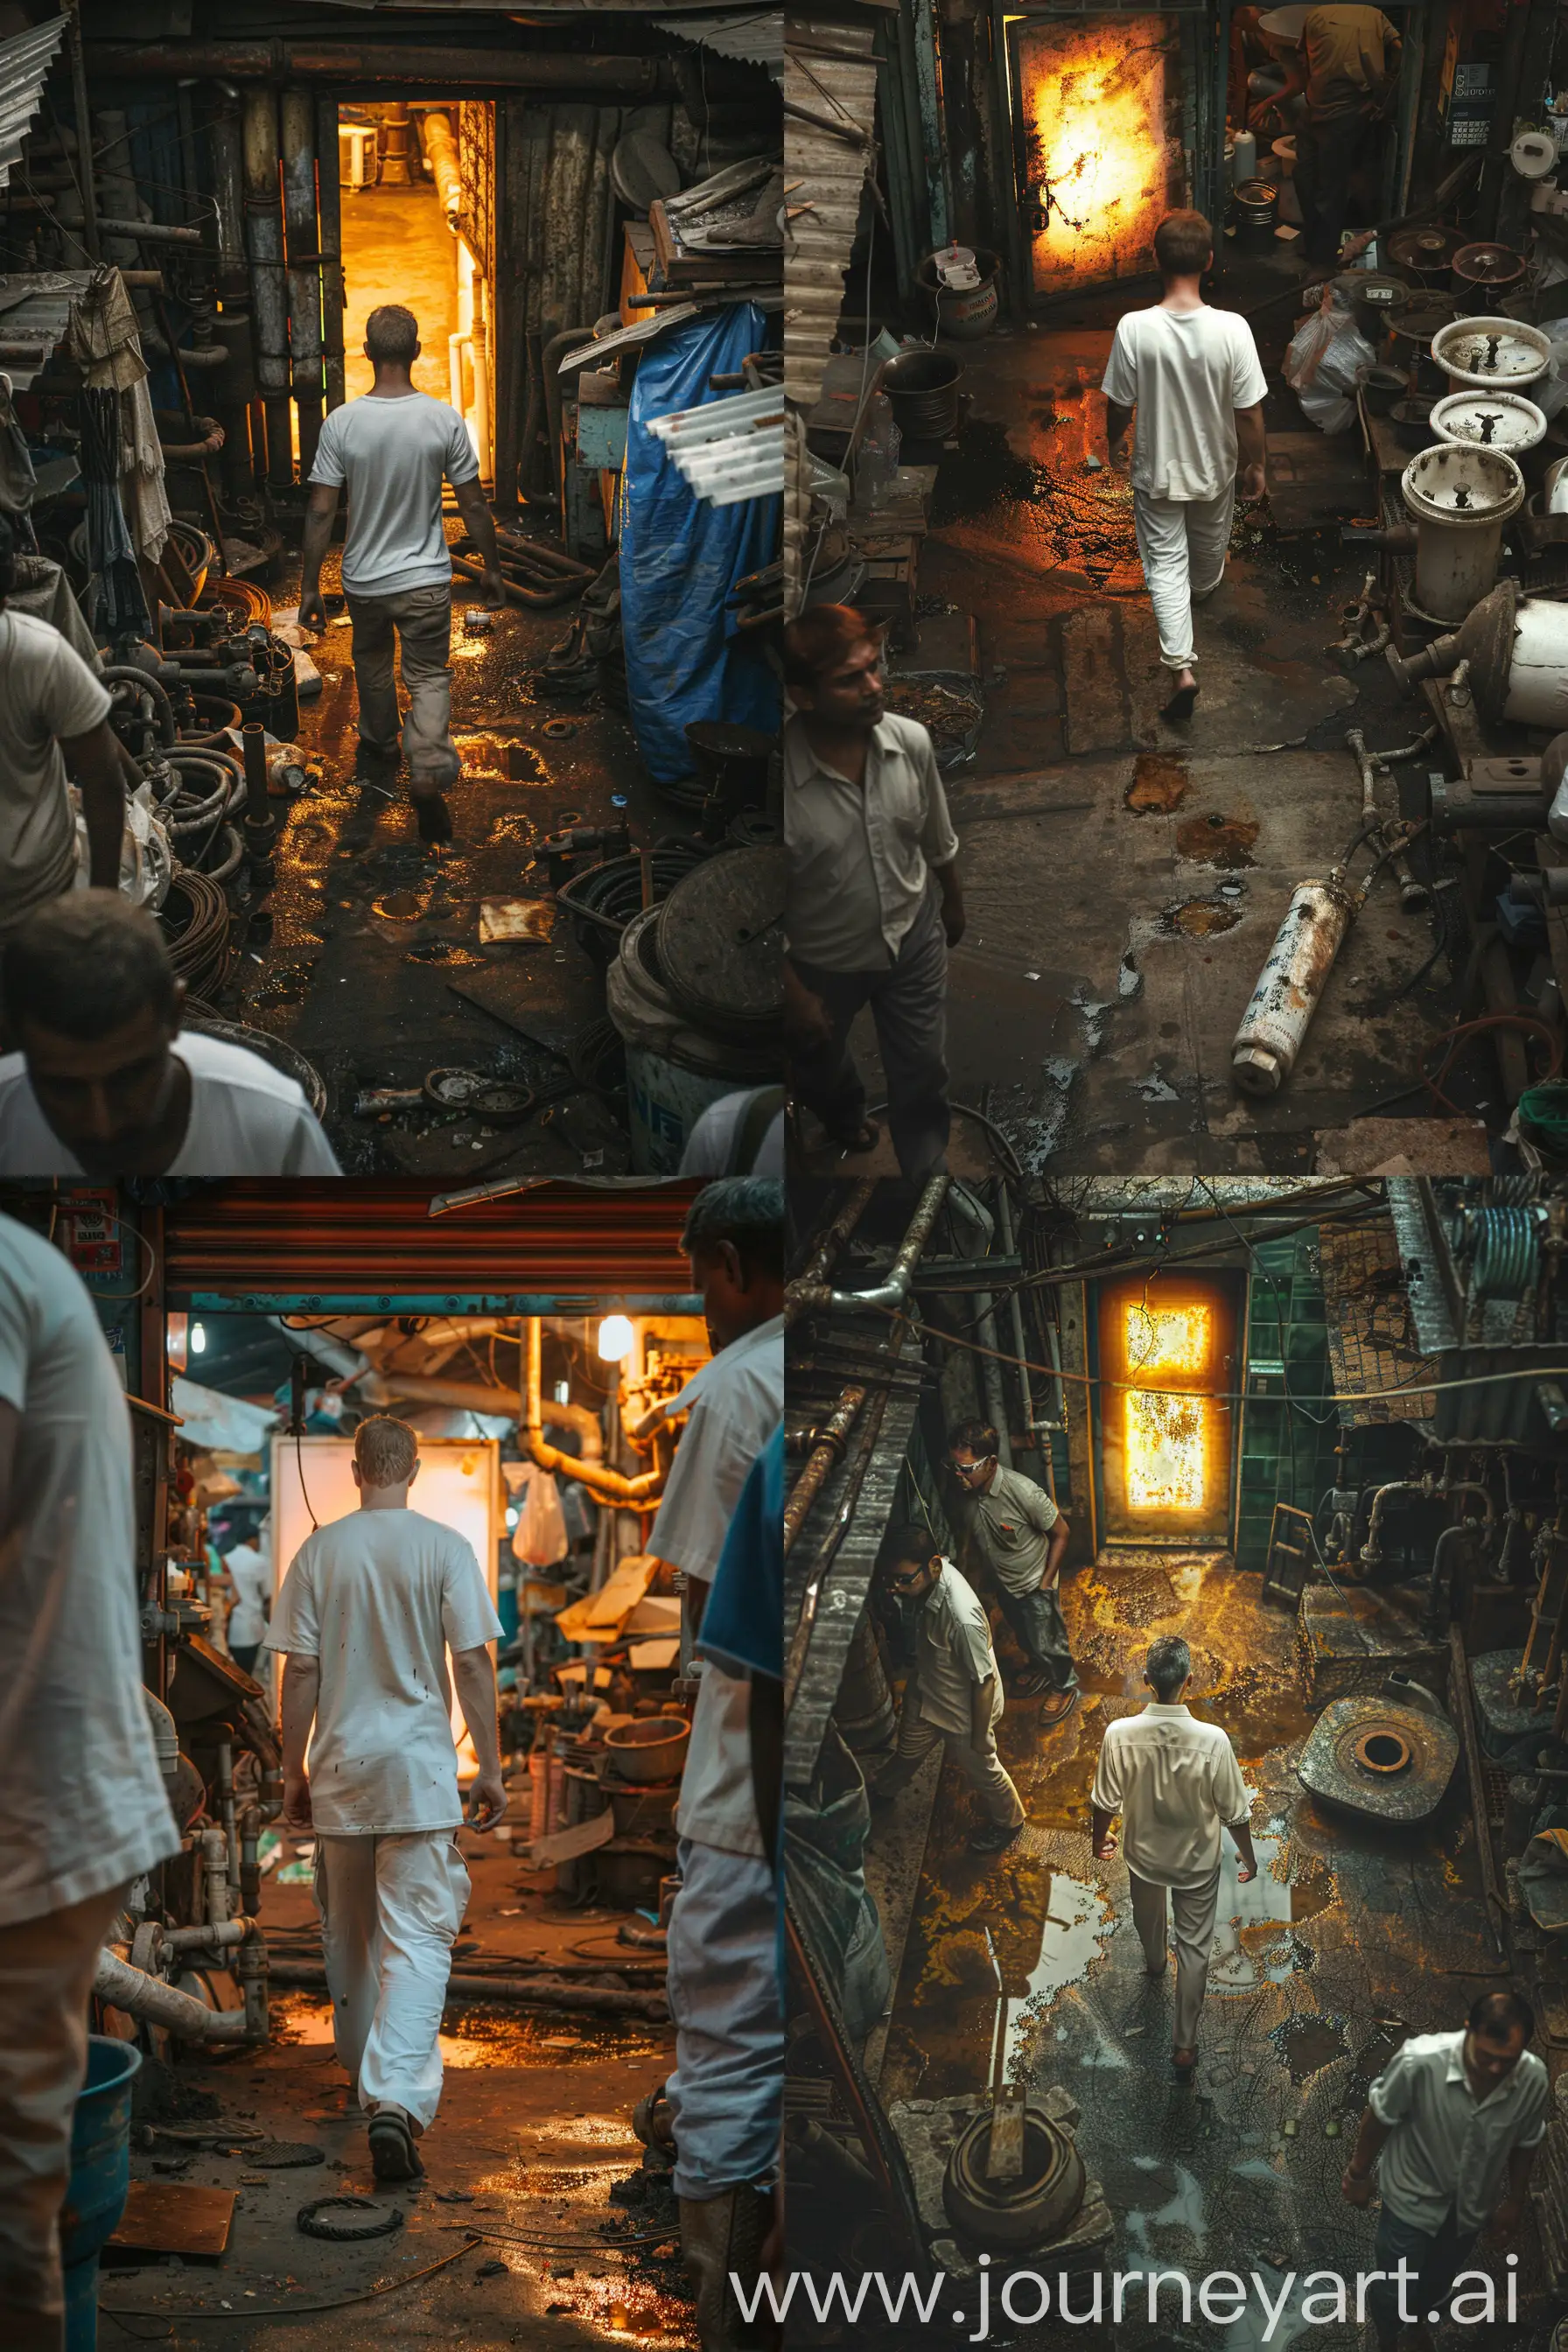 A white man is walking through the market to a glowing door. Around him at the market, sellers are haggling over rusty plumbing, and there are oil and dirt stains on the floor. --ar 4:6 --v 6